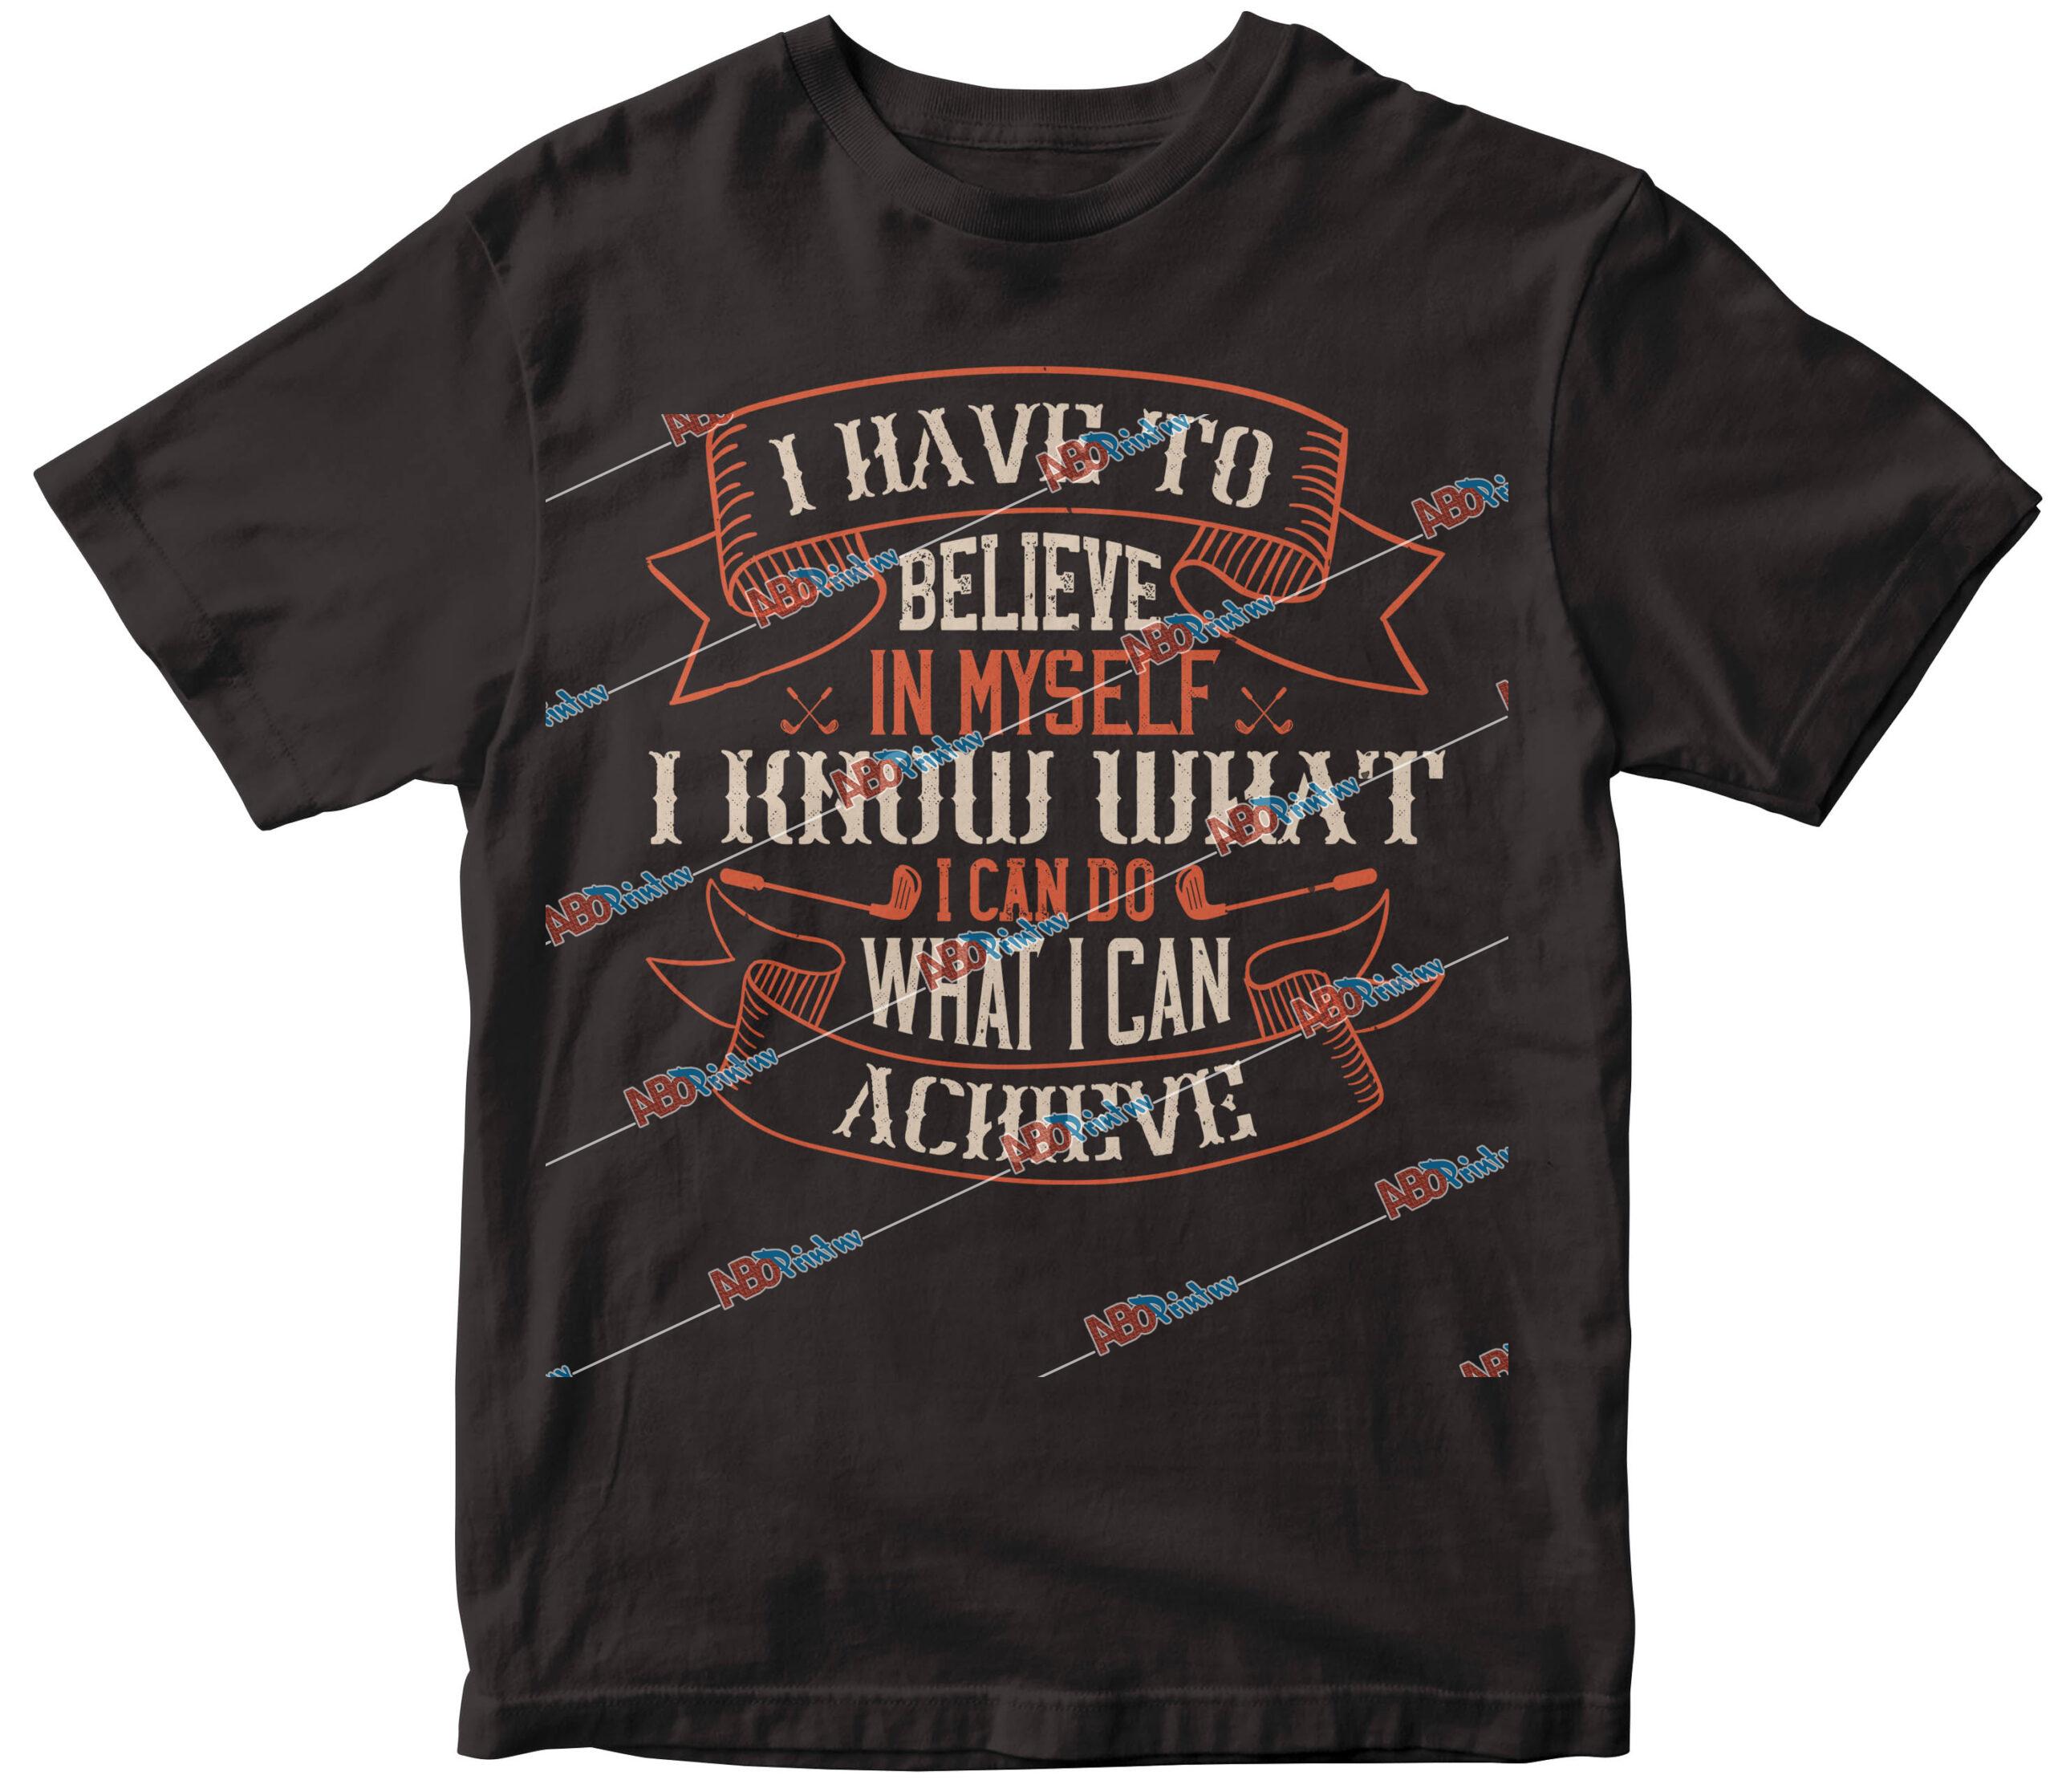 I have to believe in myself. I know what I can do, what I can achieve.jpg